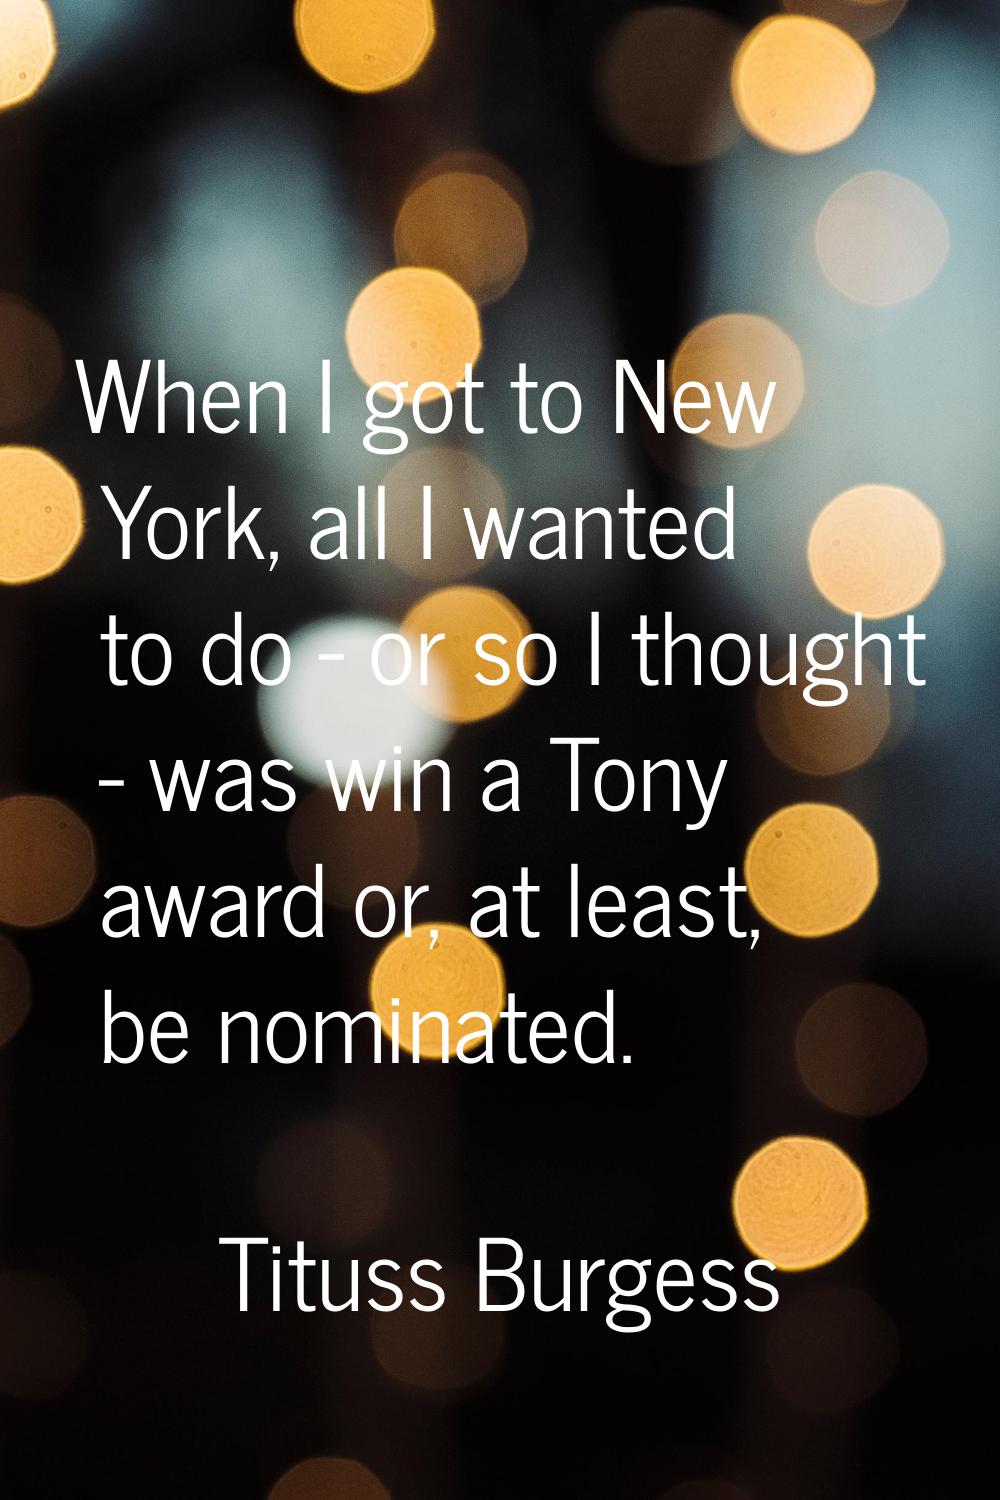 When I got to New York, all I wanted to do - or so I thought - was win a Tony award or, at least, b